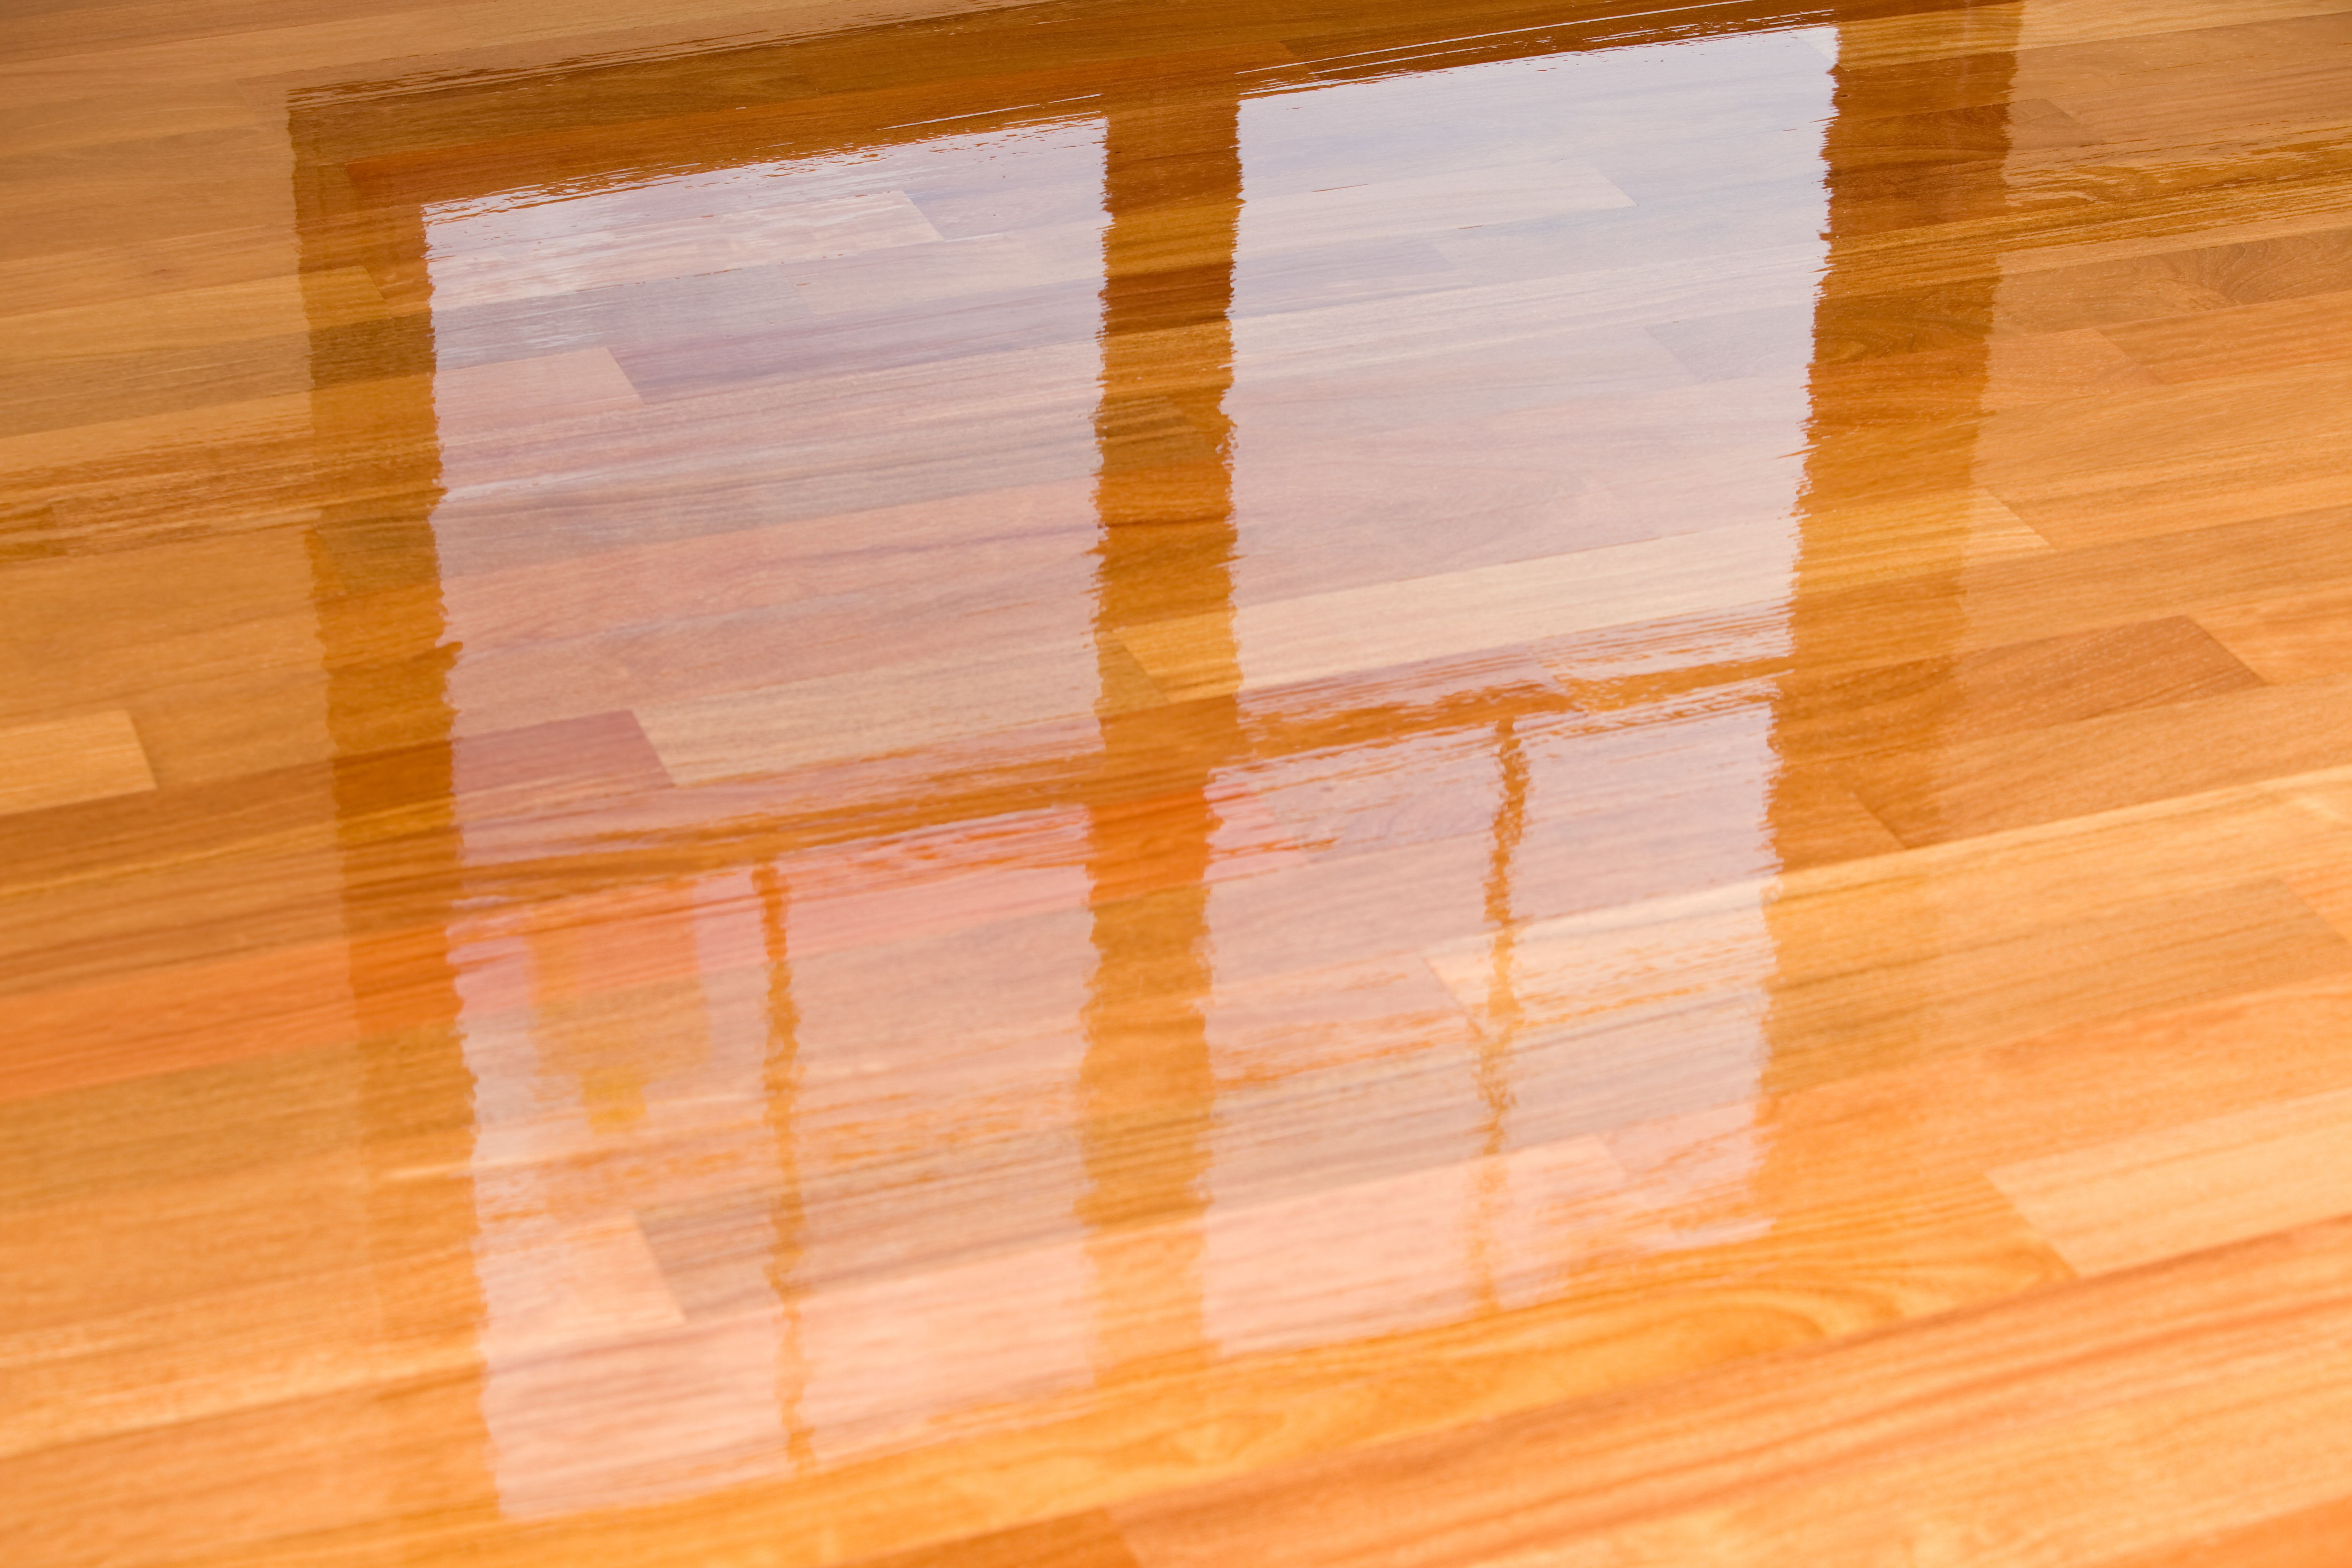 Best Way to Fill Gaps In Hardwood Floors Of Guide to Laminate Flooring Water and Damage Repair with Wet Polyurethane On New Hardwood Floor with Window Reflection 183846705 582e34da3df78c6f6a403968